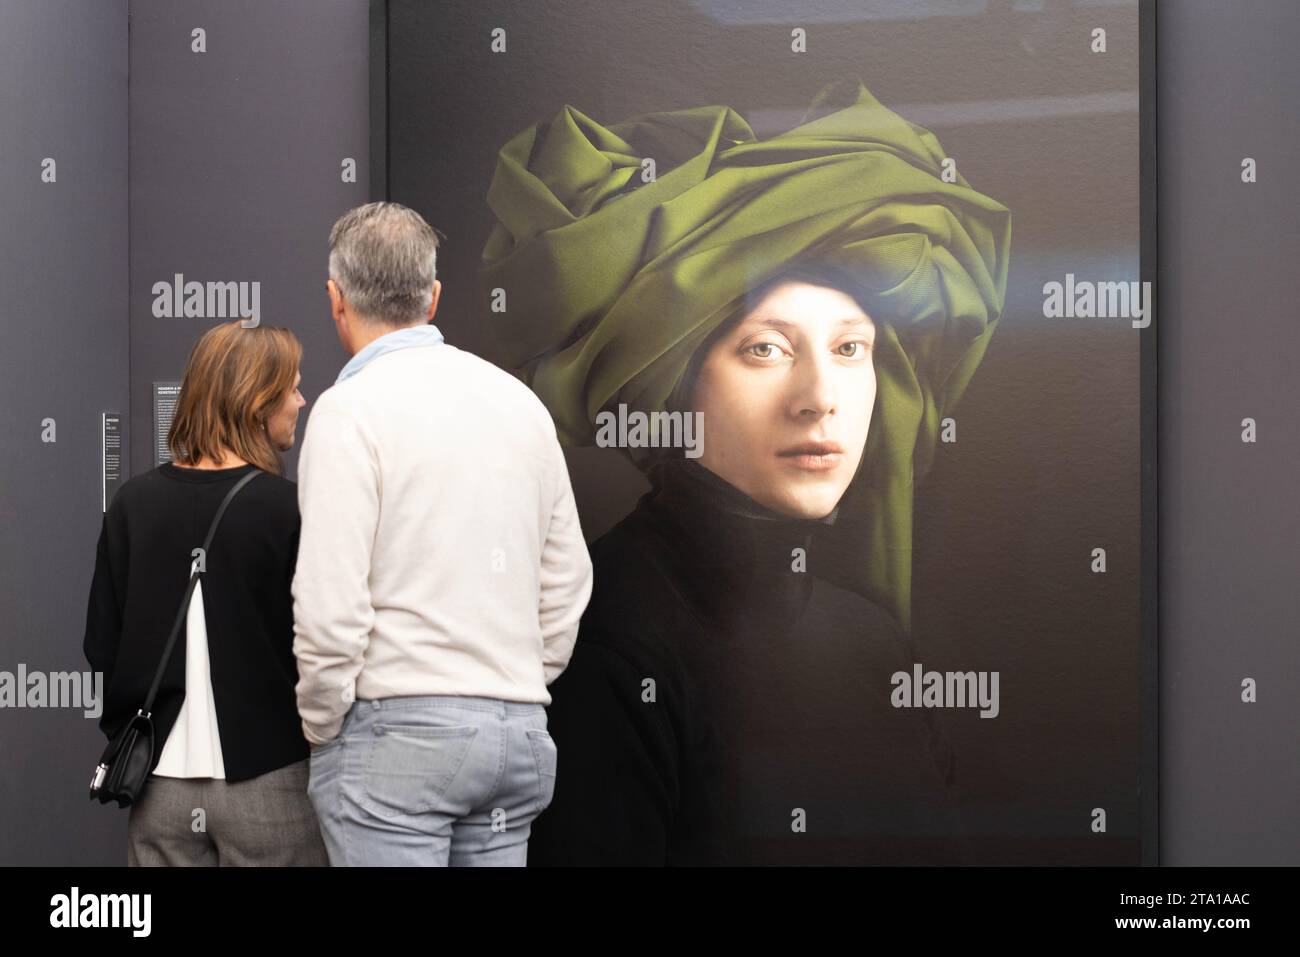 Amsterdam, Netherlands. 23rd Nov, 2023. Visitors view an artwork at the 36th PAN Amsterdam at the RAI convention center in Amsterdam, the Netherlands, Nov. 23, 2023. The 36th PAN Amsterdam, the Netherlands' leading annual fair in art, antiques and design, was held from November 19 to 26 this year in Amsterdam. Credit: Sylvia Lederer/Xinhua/Alamy Live News Stock Photo